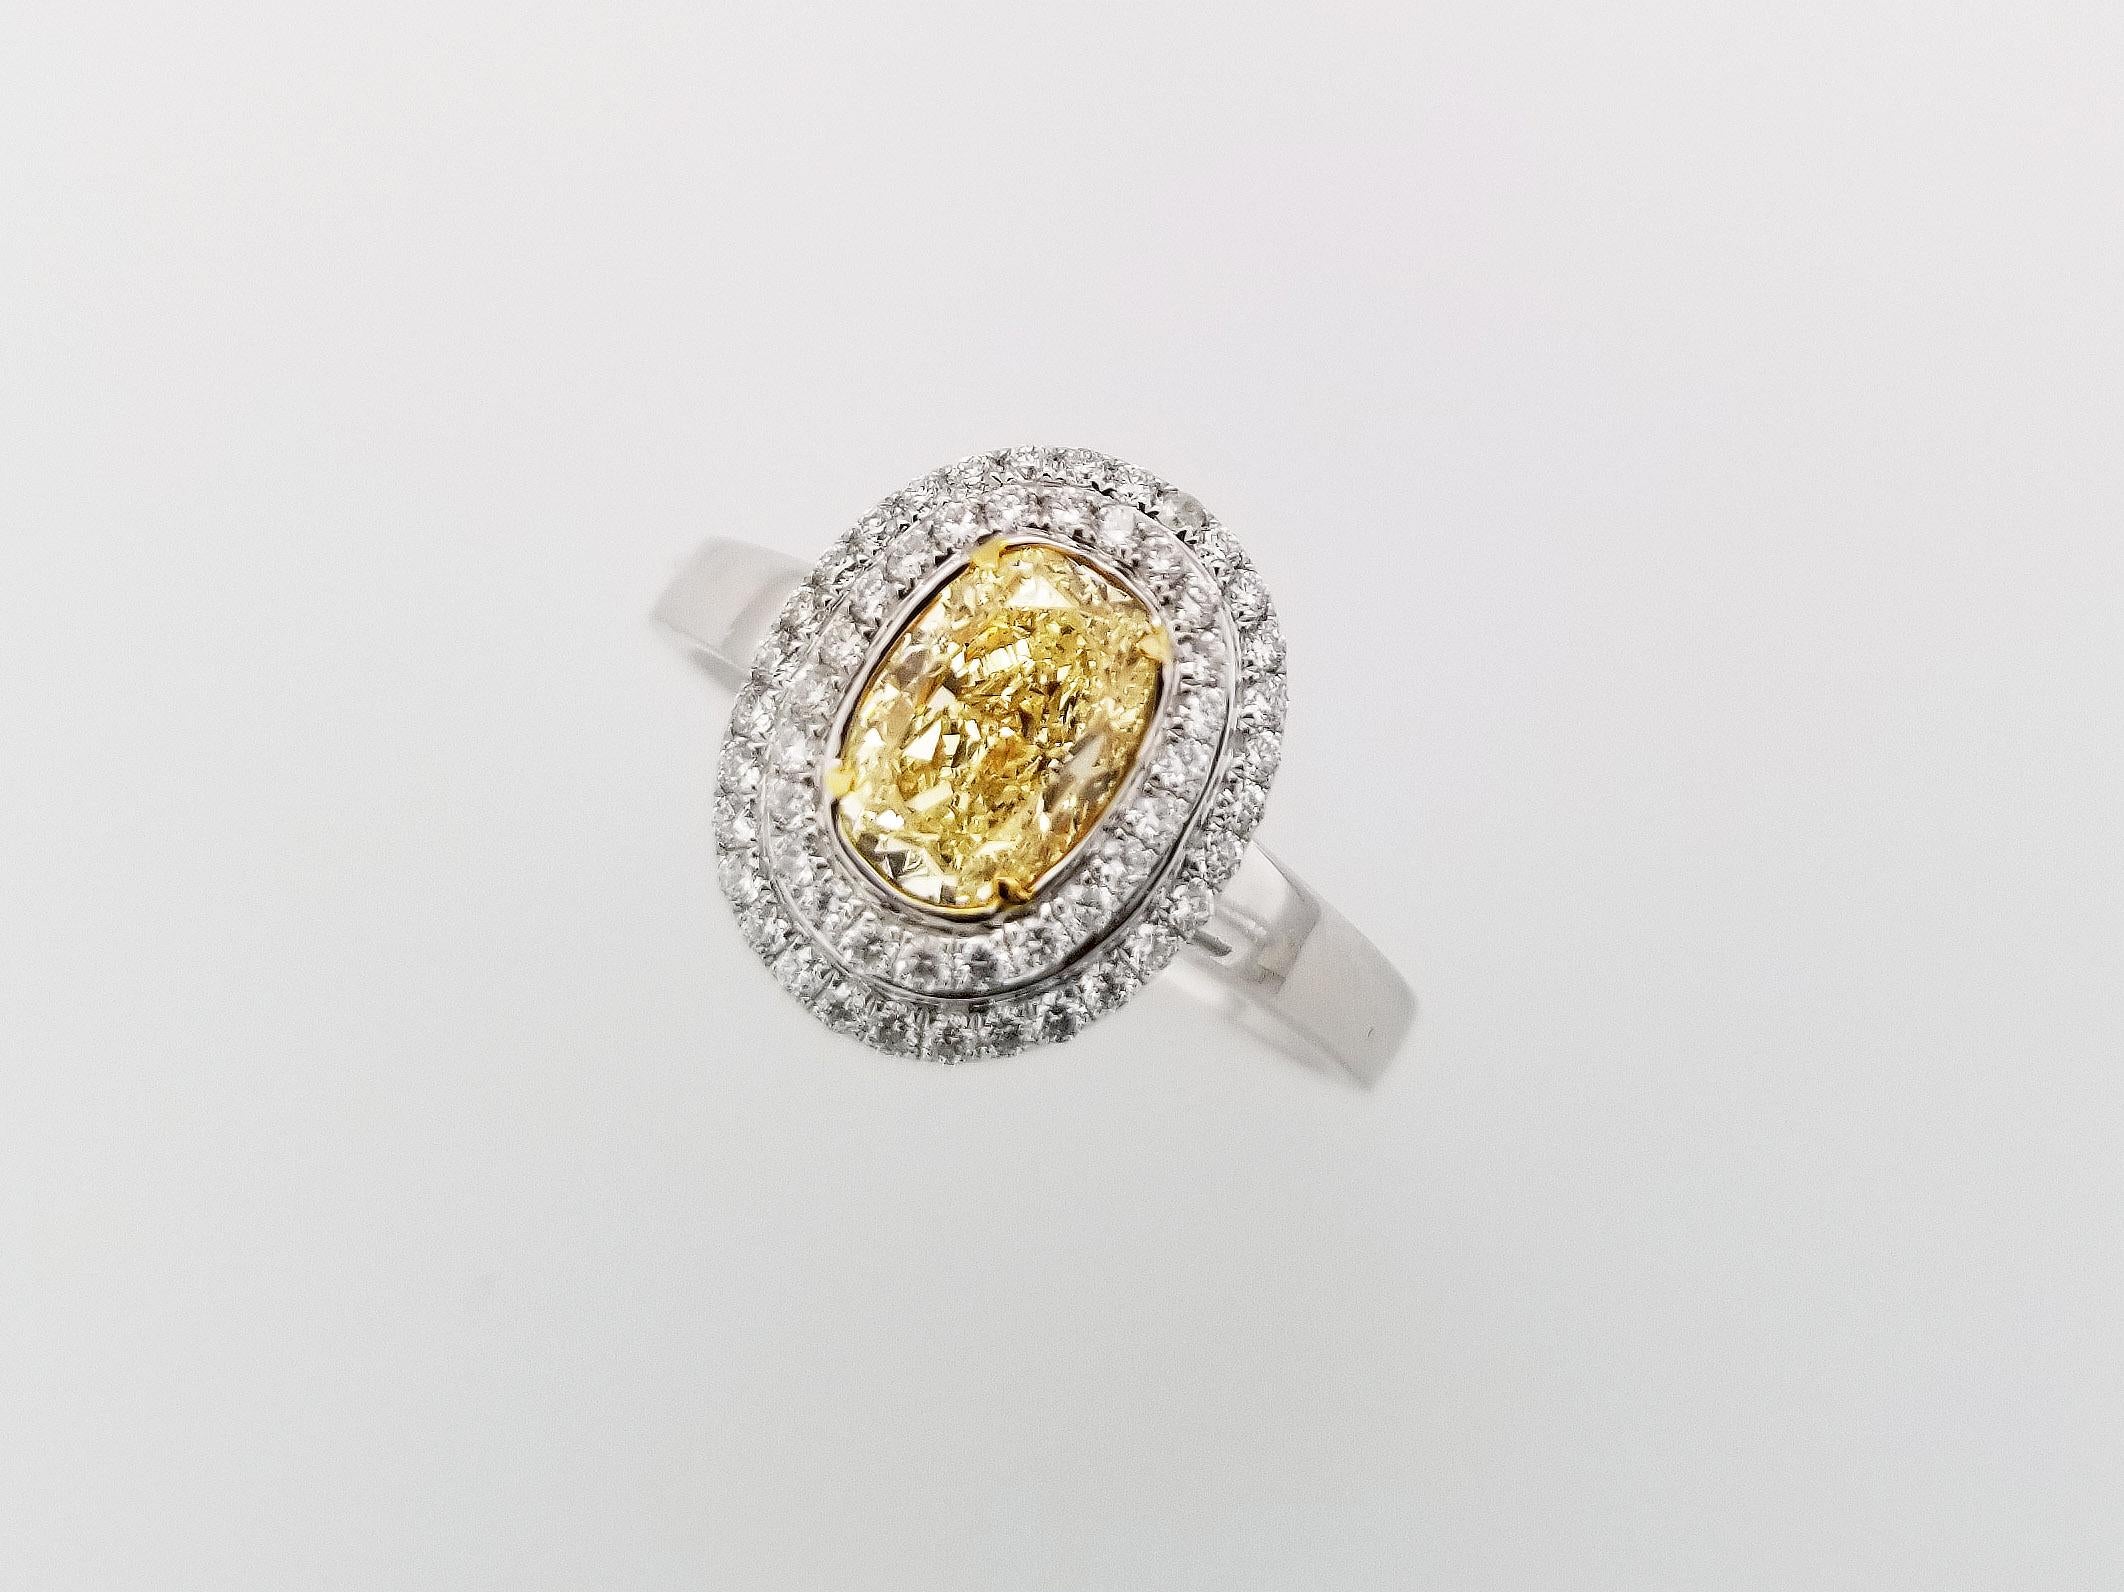 Mother's Day Gift Guide!

A timeless heirloom ring with 1.20 Carat Fancy Light Yellow Diamond center stone, surrounded by two rows of round white diamonds, TCW 0.29. The center stone has a clarity of SI1 and the 18k white gold band can be resized